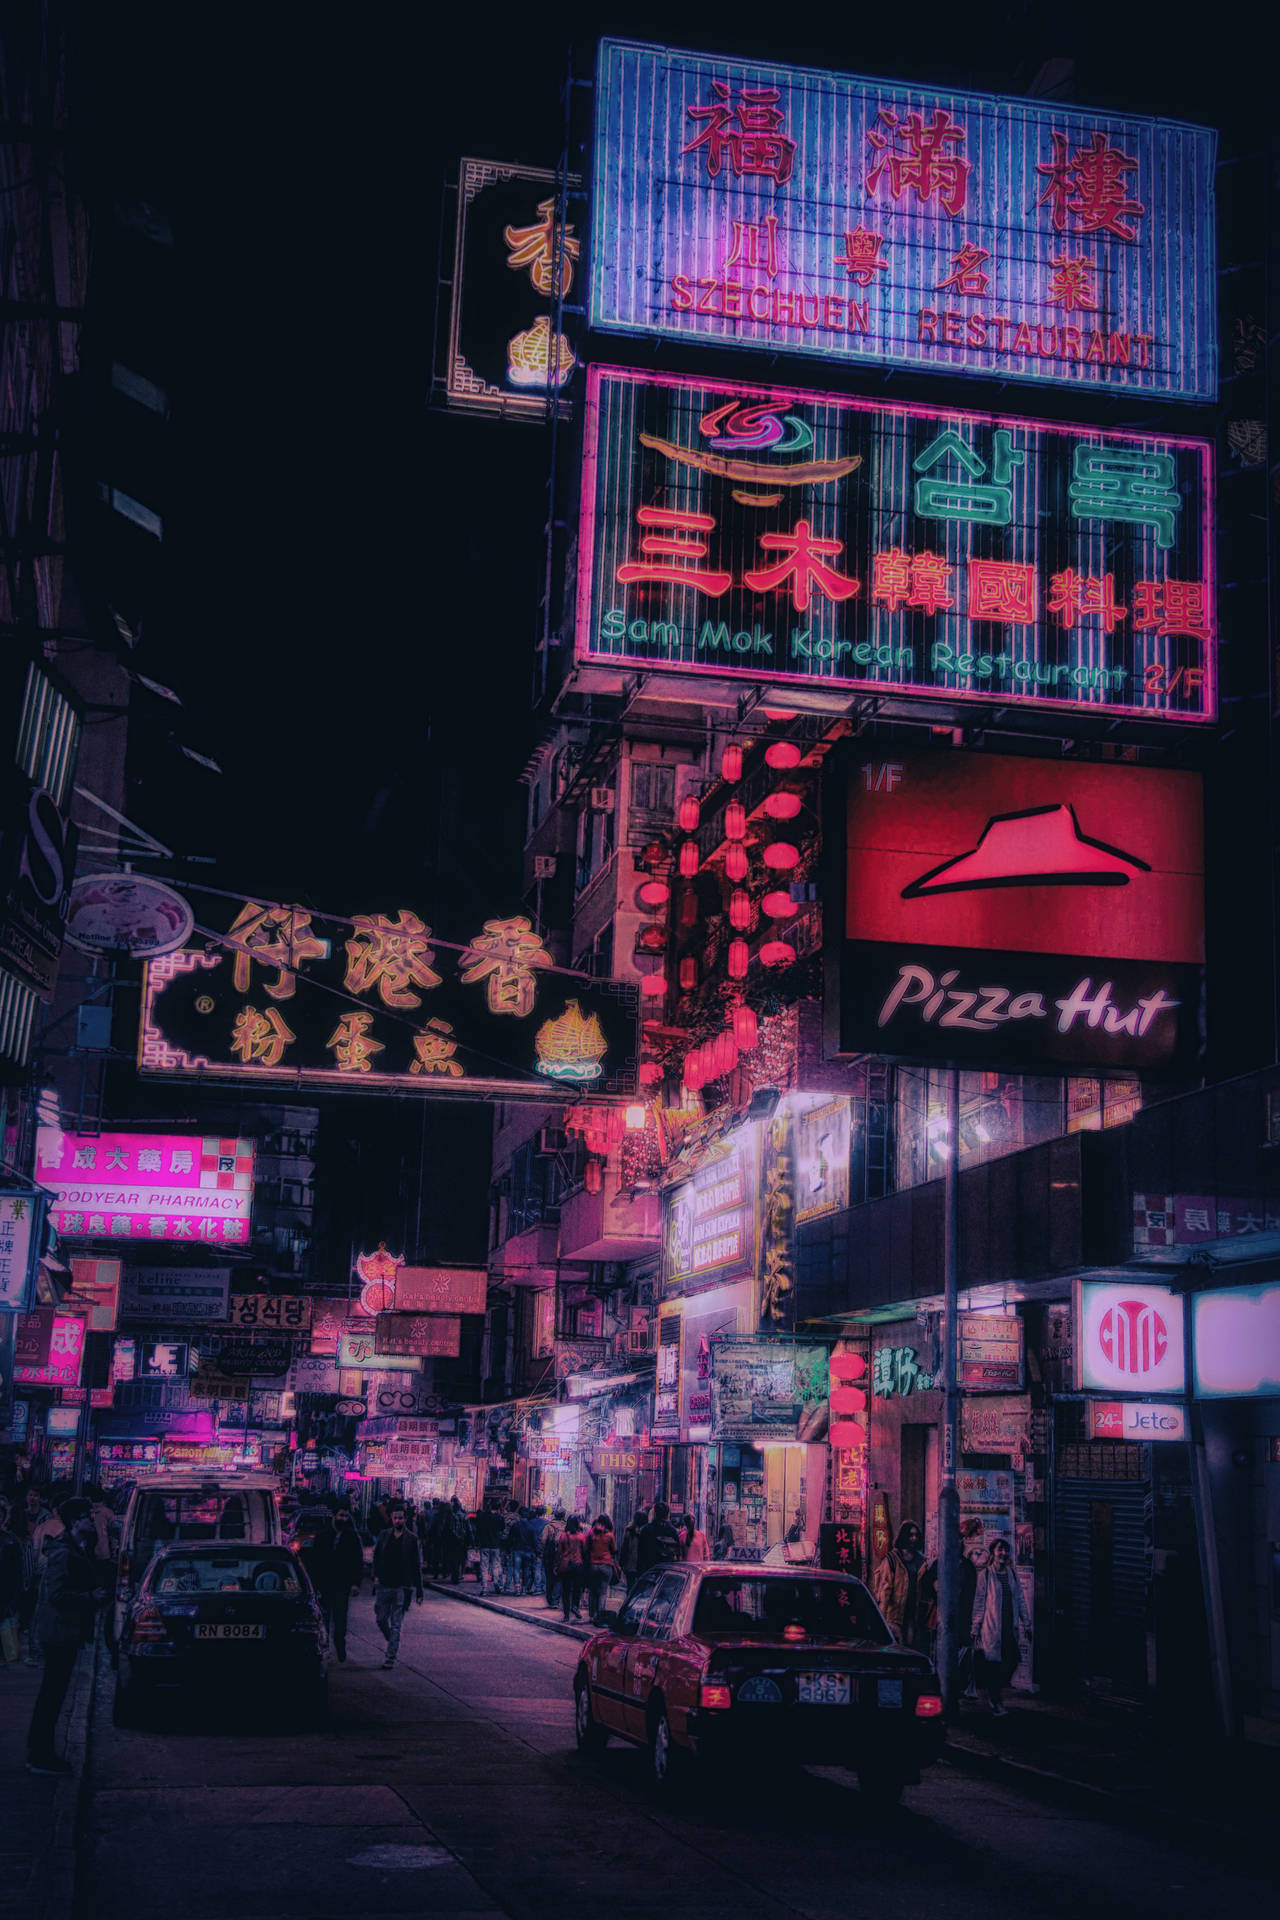 Chinese Aesthetic Wallpapers